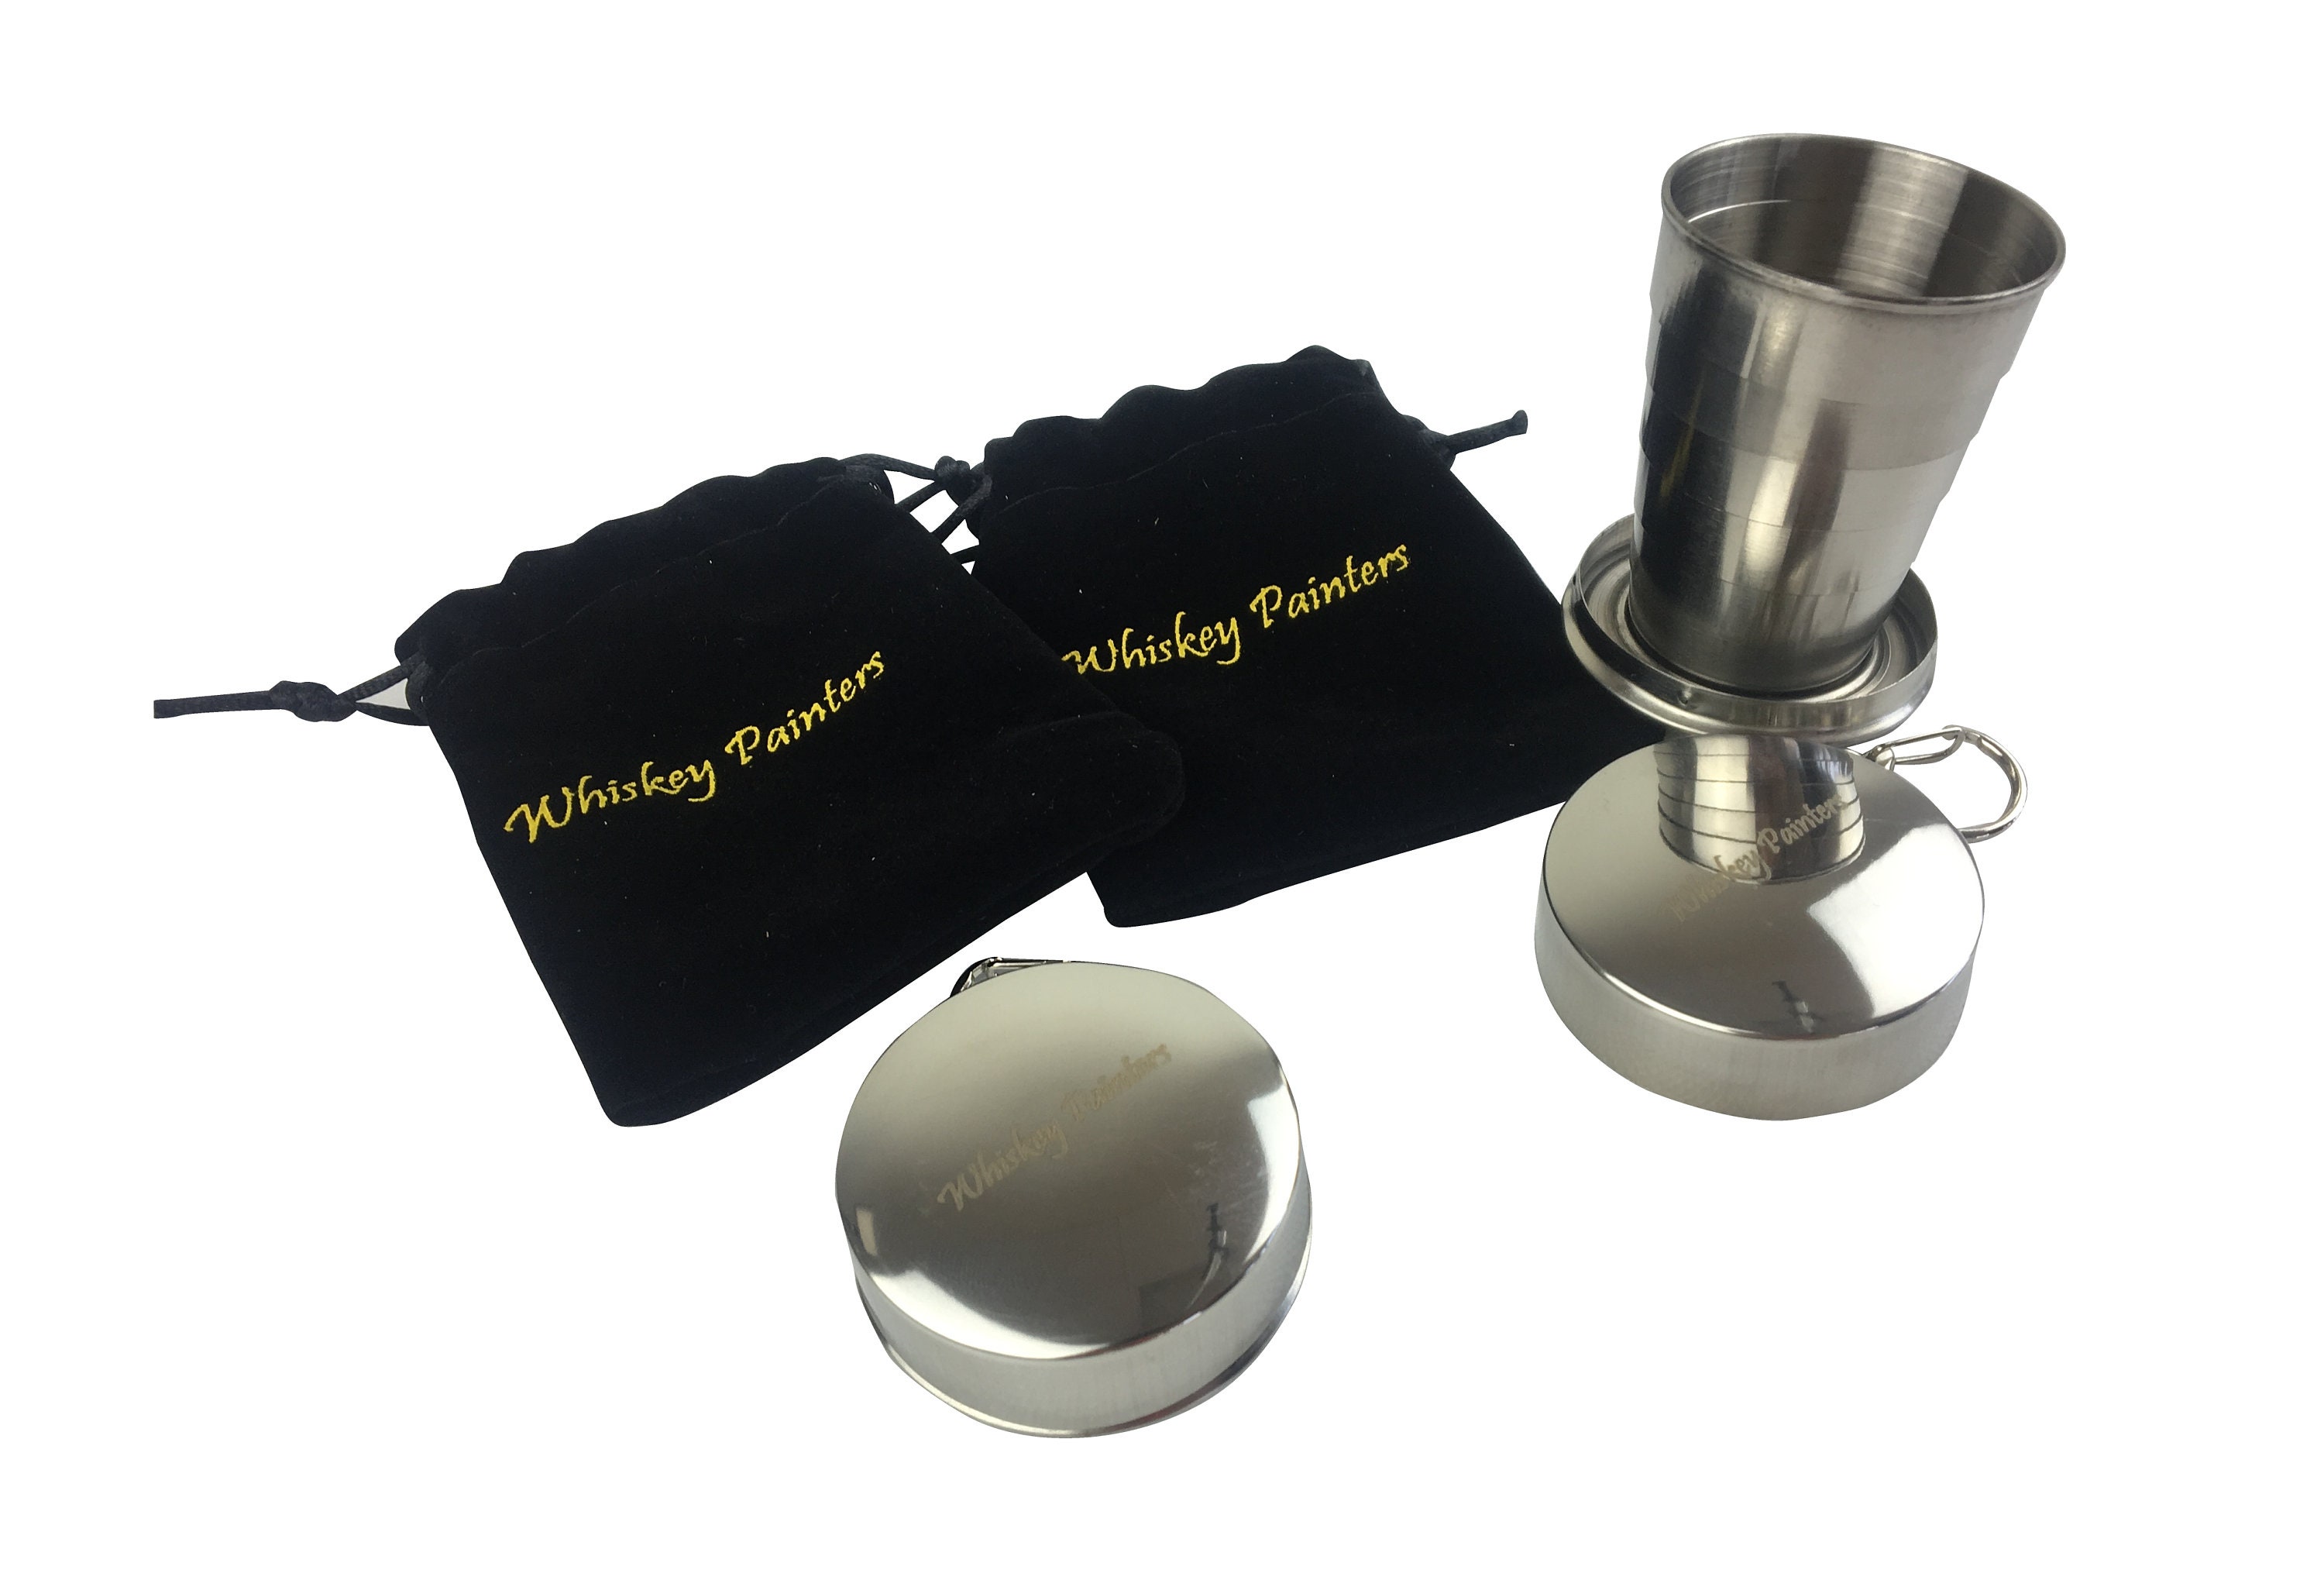 NEW Original Whiskey Painters Folding Stainless Steel Cup for Watercolor on  the Go Portable Key Chain Compact 2 Free Water Brush 